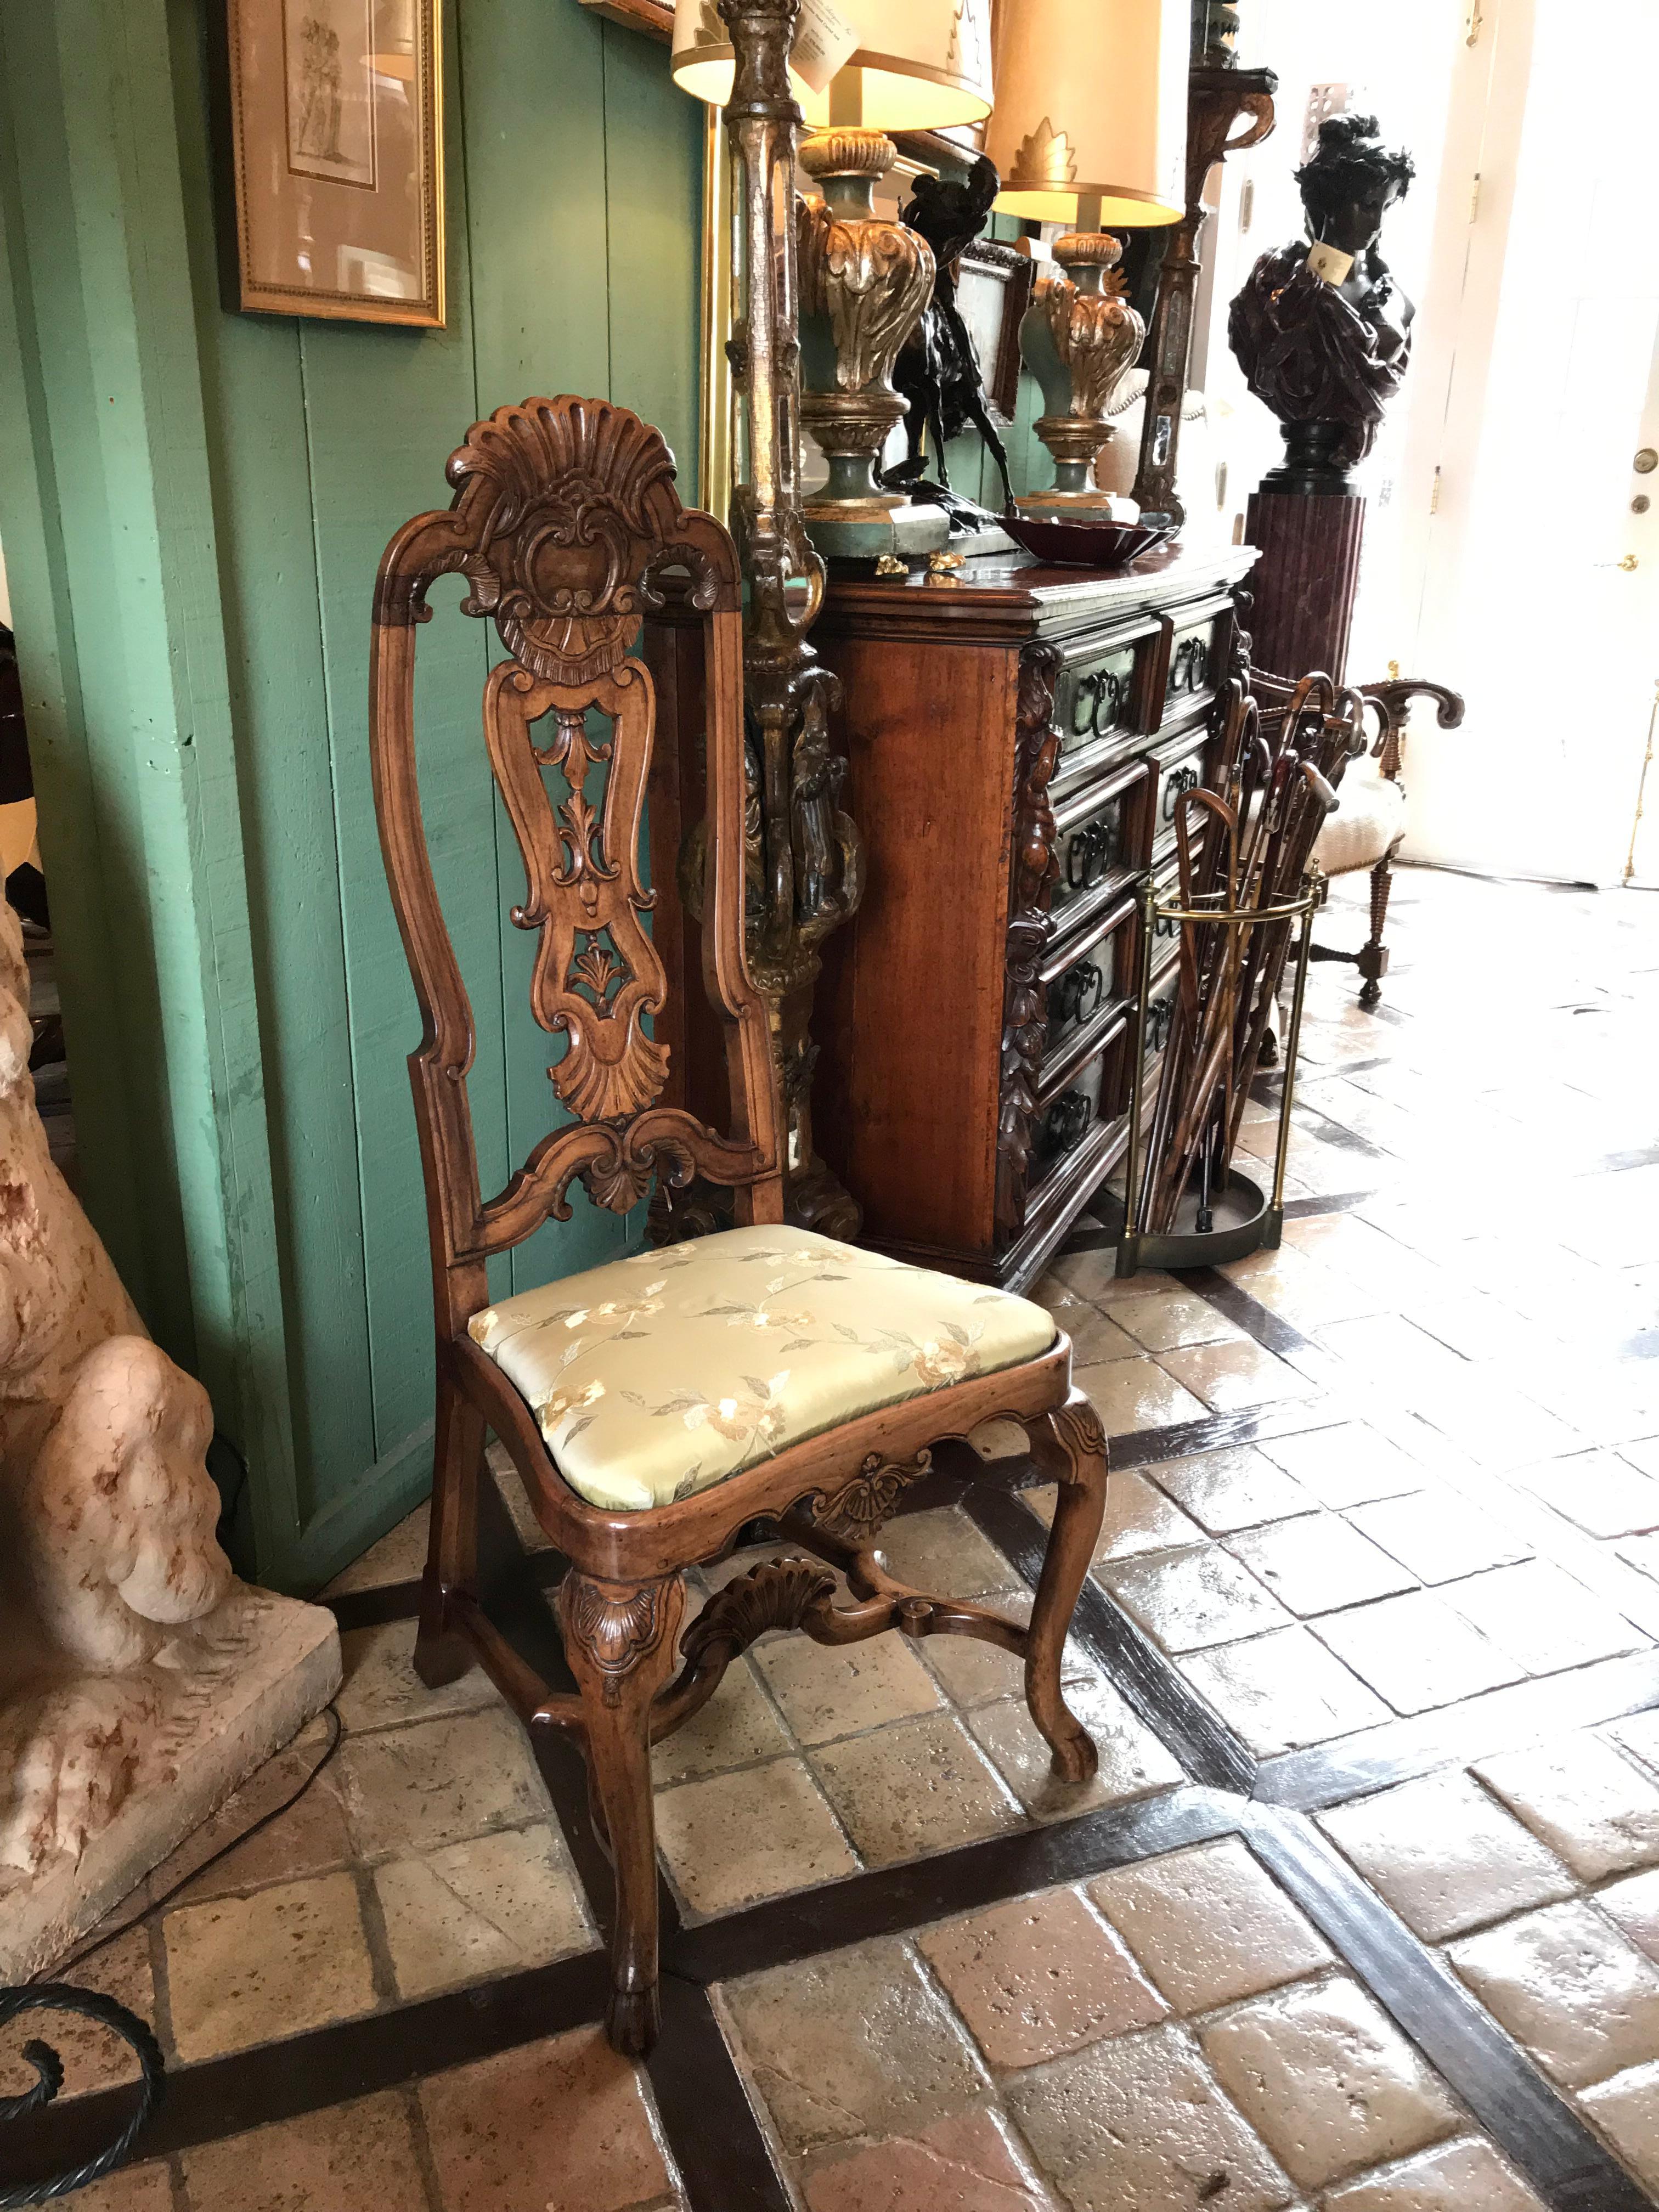 Good pair of 18th century Portuguese Colonial carved palisander wood side chairs. 

Portuguese furnishings of the 18th century are bold, quirky, intensive and unlike those of any other country. They have their own national flavour. The pieces